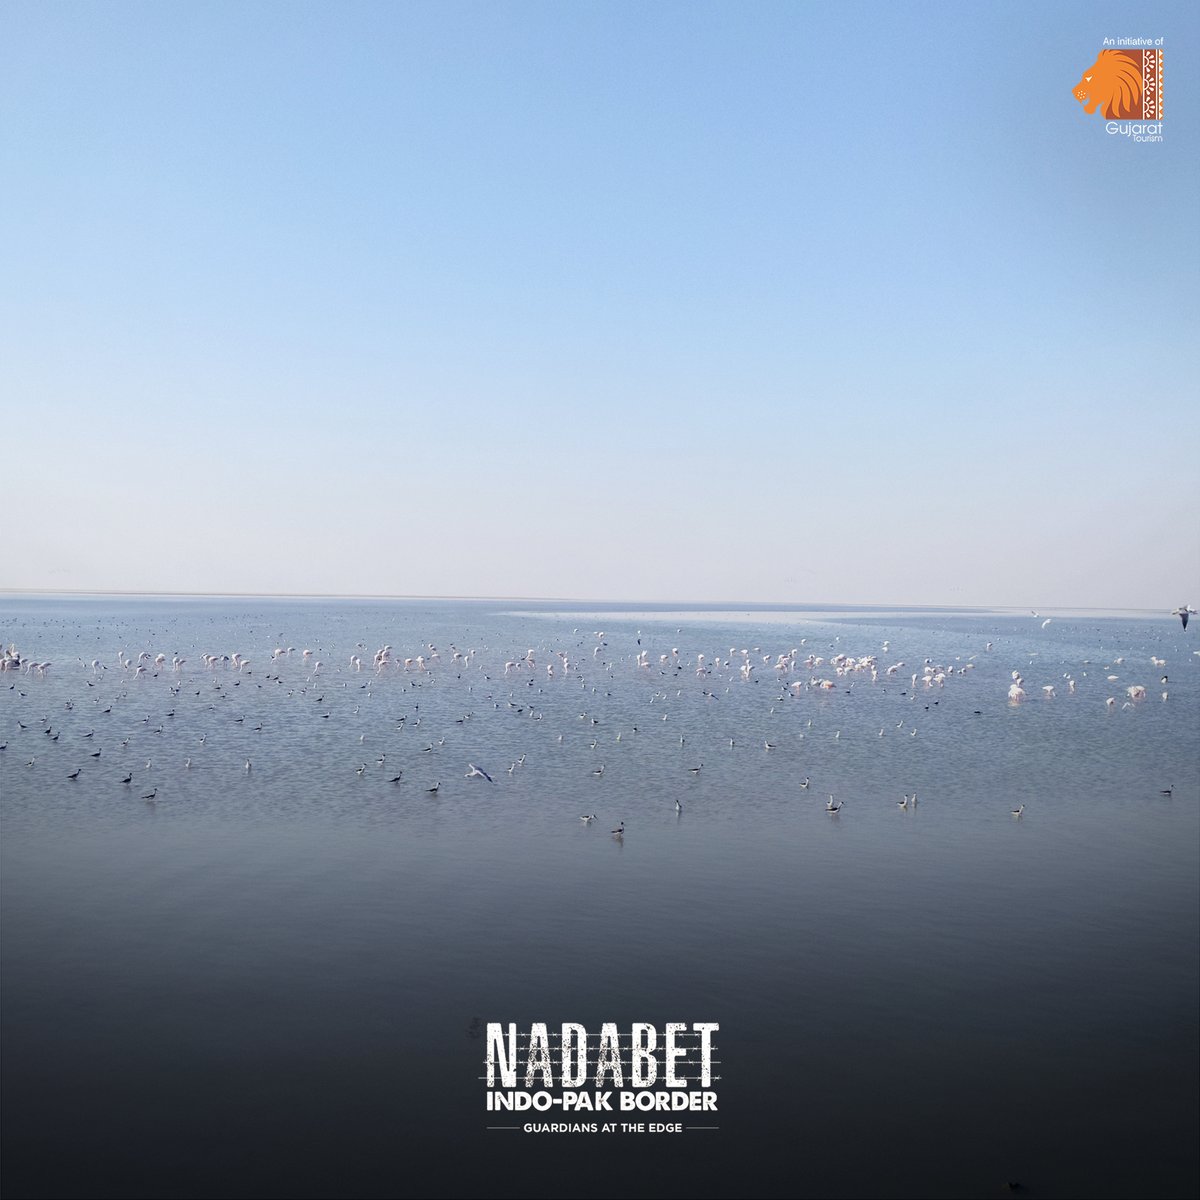 A few glimpses of the bird watching activity at the Nadabet Indo-Pak Border. The place hosts different bird species from various habitats. 

#birdwatching #Nadabet #bordertourism #NadabetBorder #visitnadabet #Gujarat #GujaratTourism